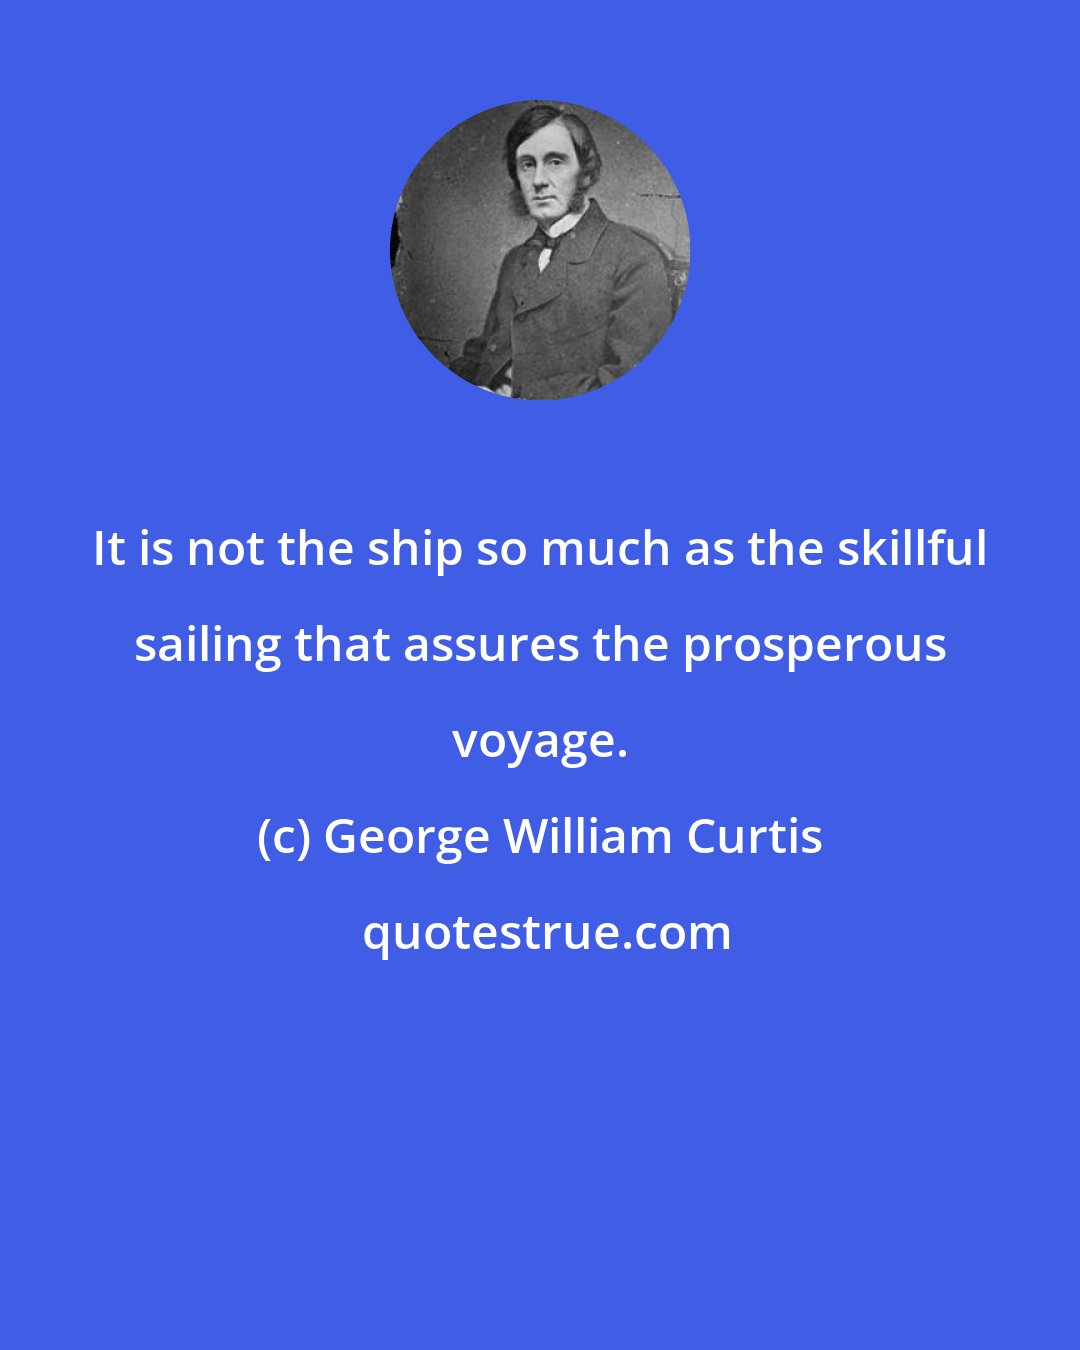 George William Curtis: It is not the ship so much as the skillful sailing that assures the prosperous voyage.